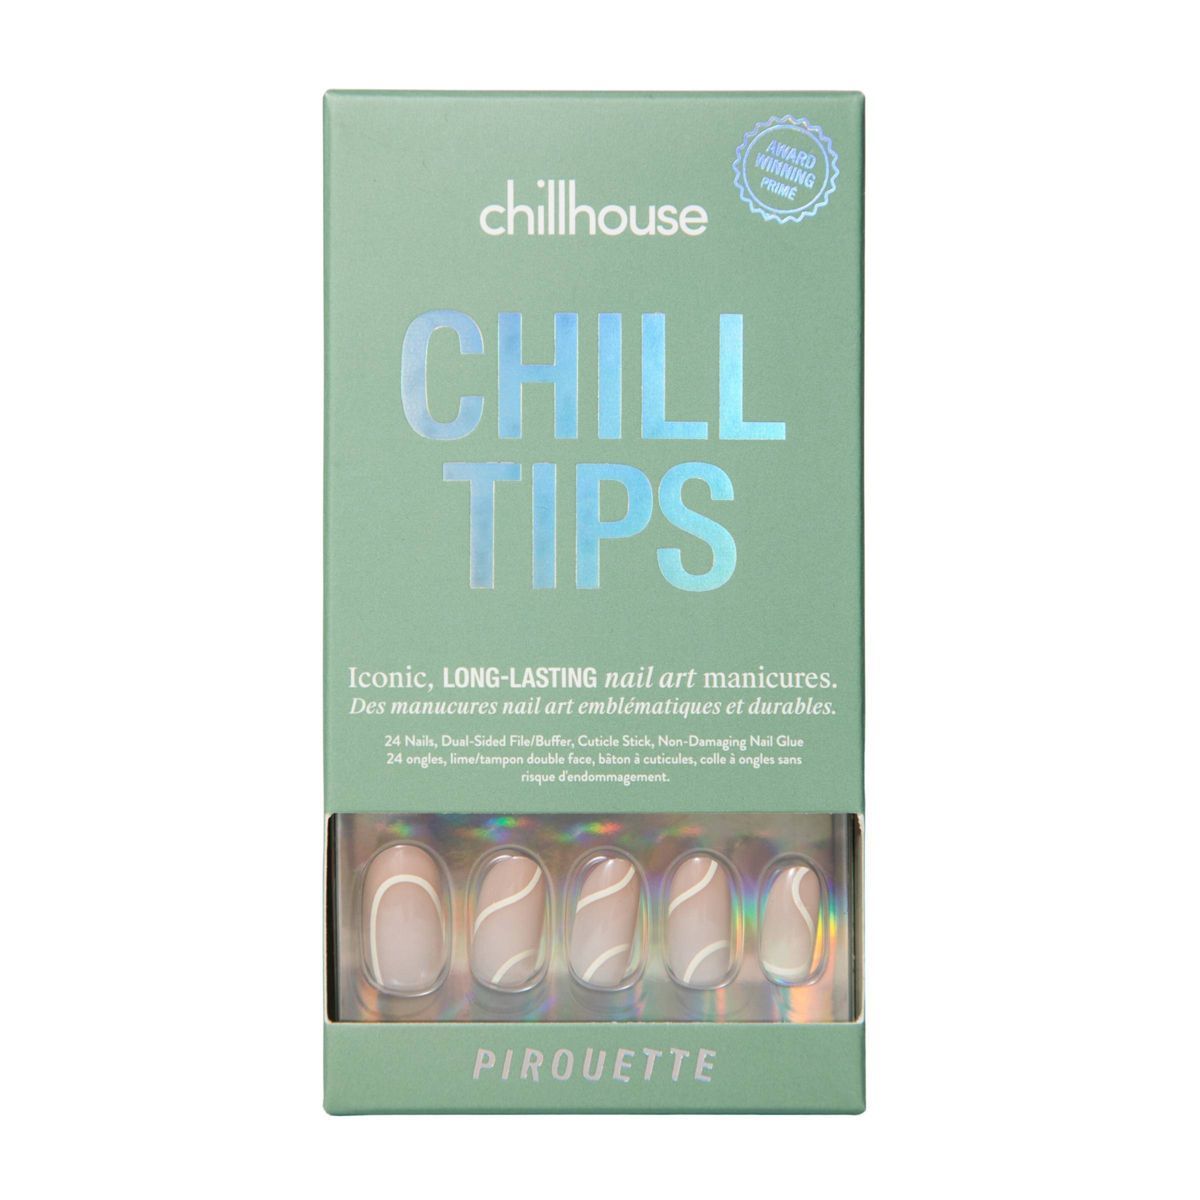 Chillhouse Chill Tips Fake Nails - Pirouette - 24ct | Target